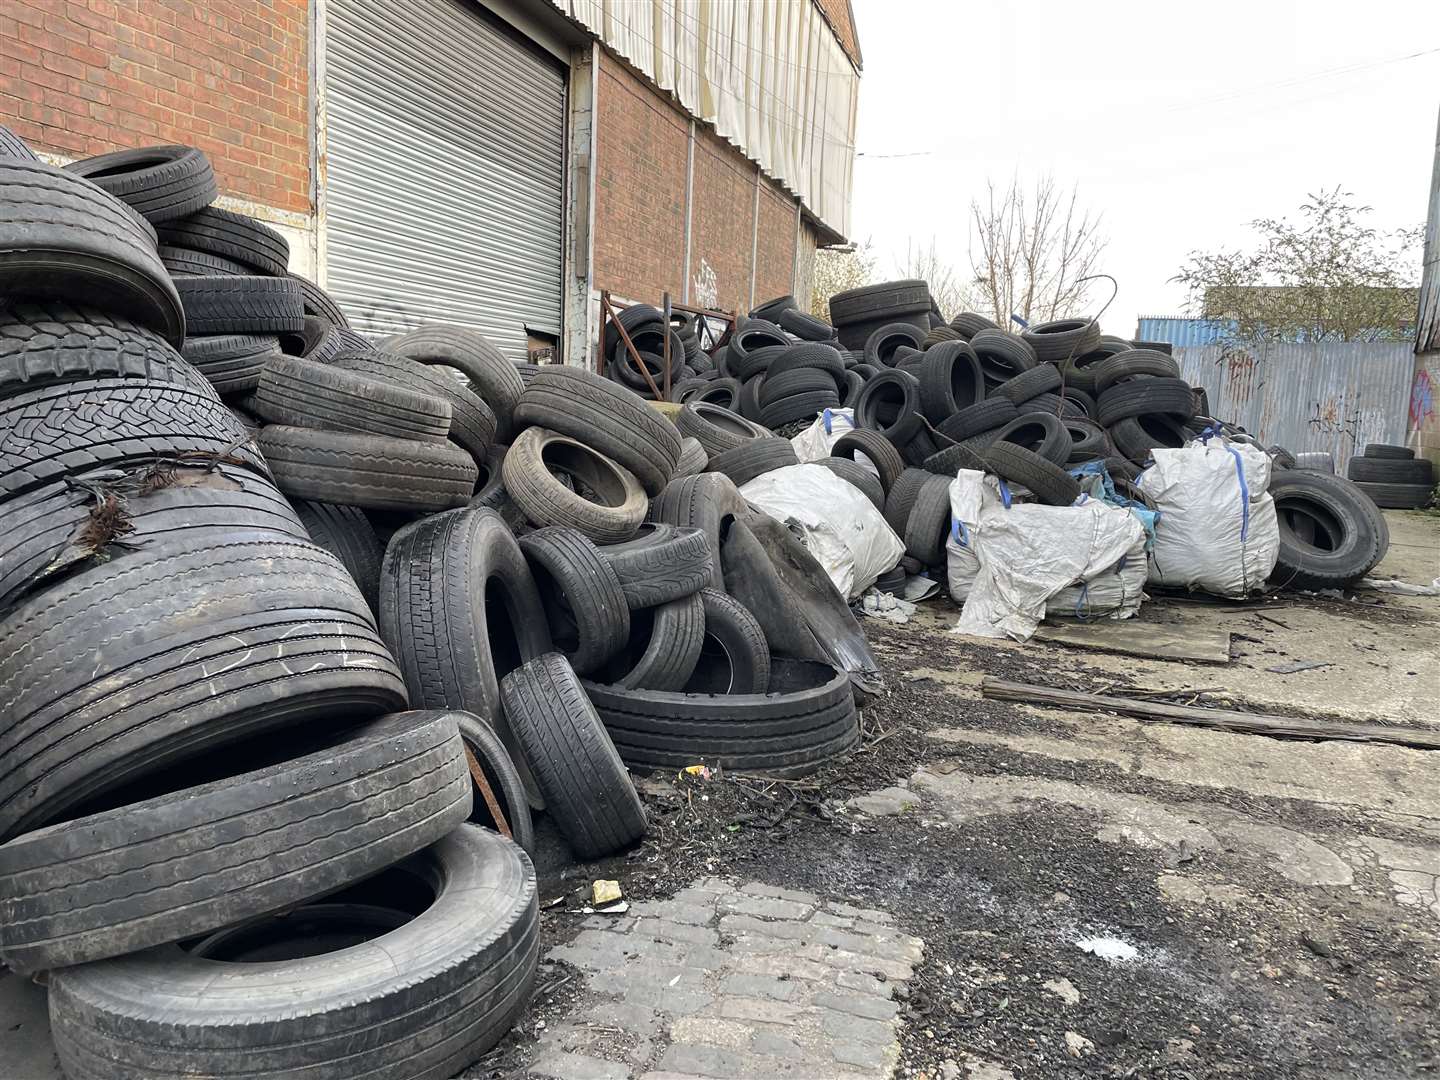 Enforcement action is being taken against the fly-tipping